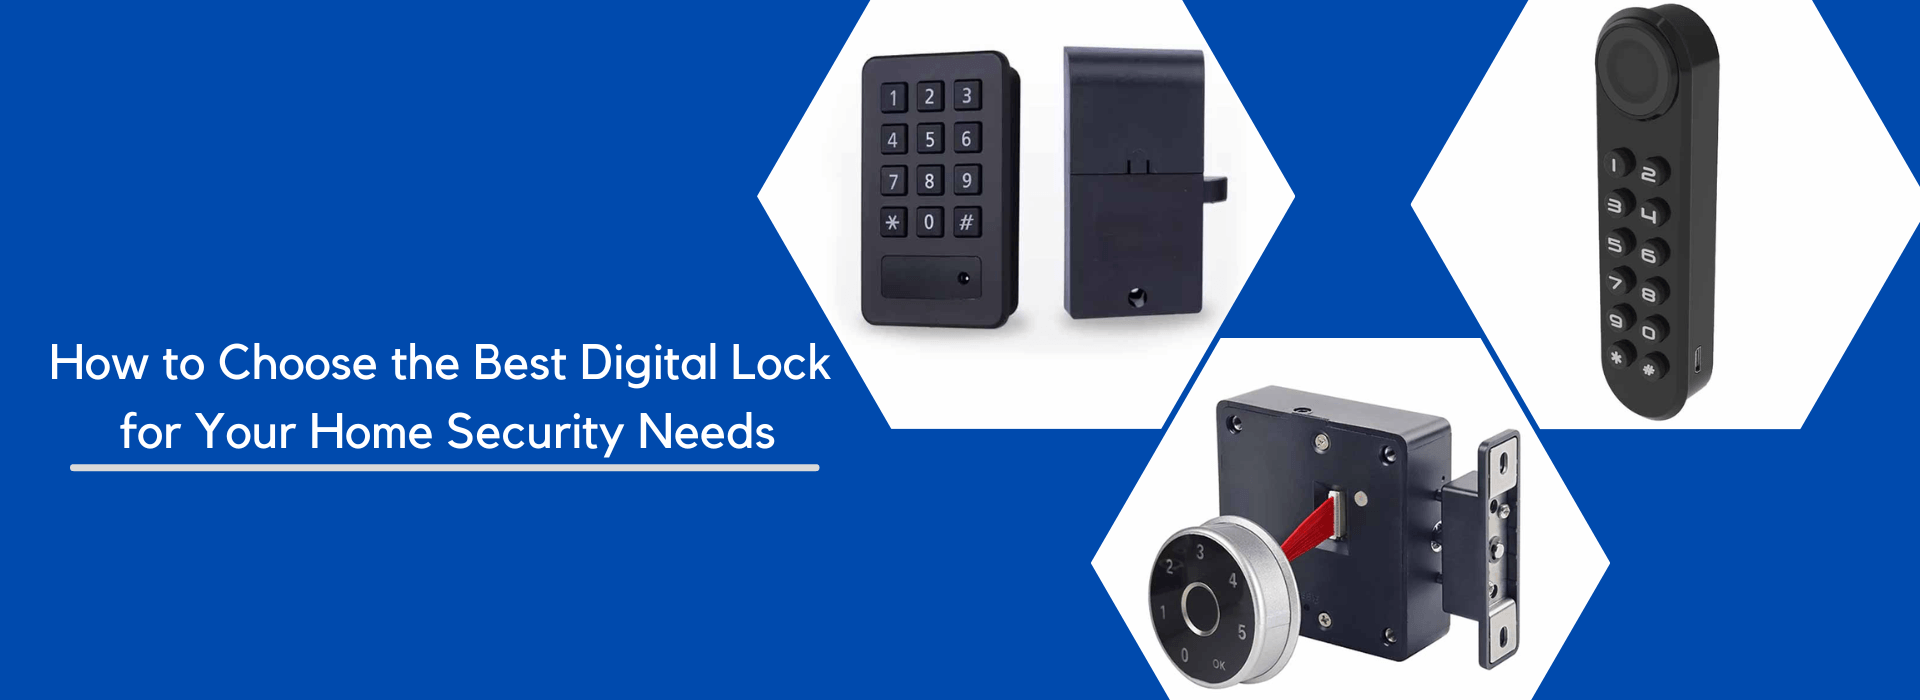 Best Digital Lock for Your Home Security Needs